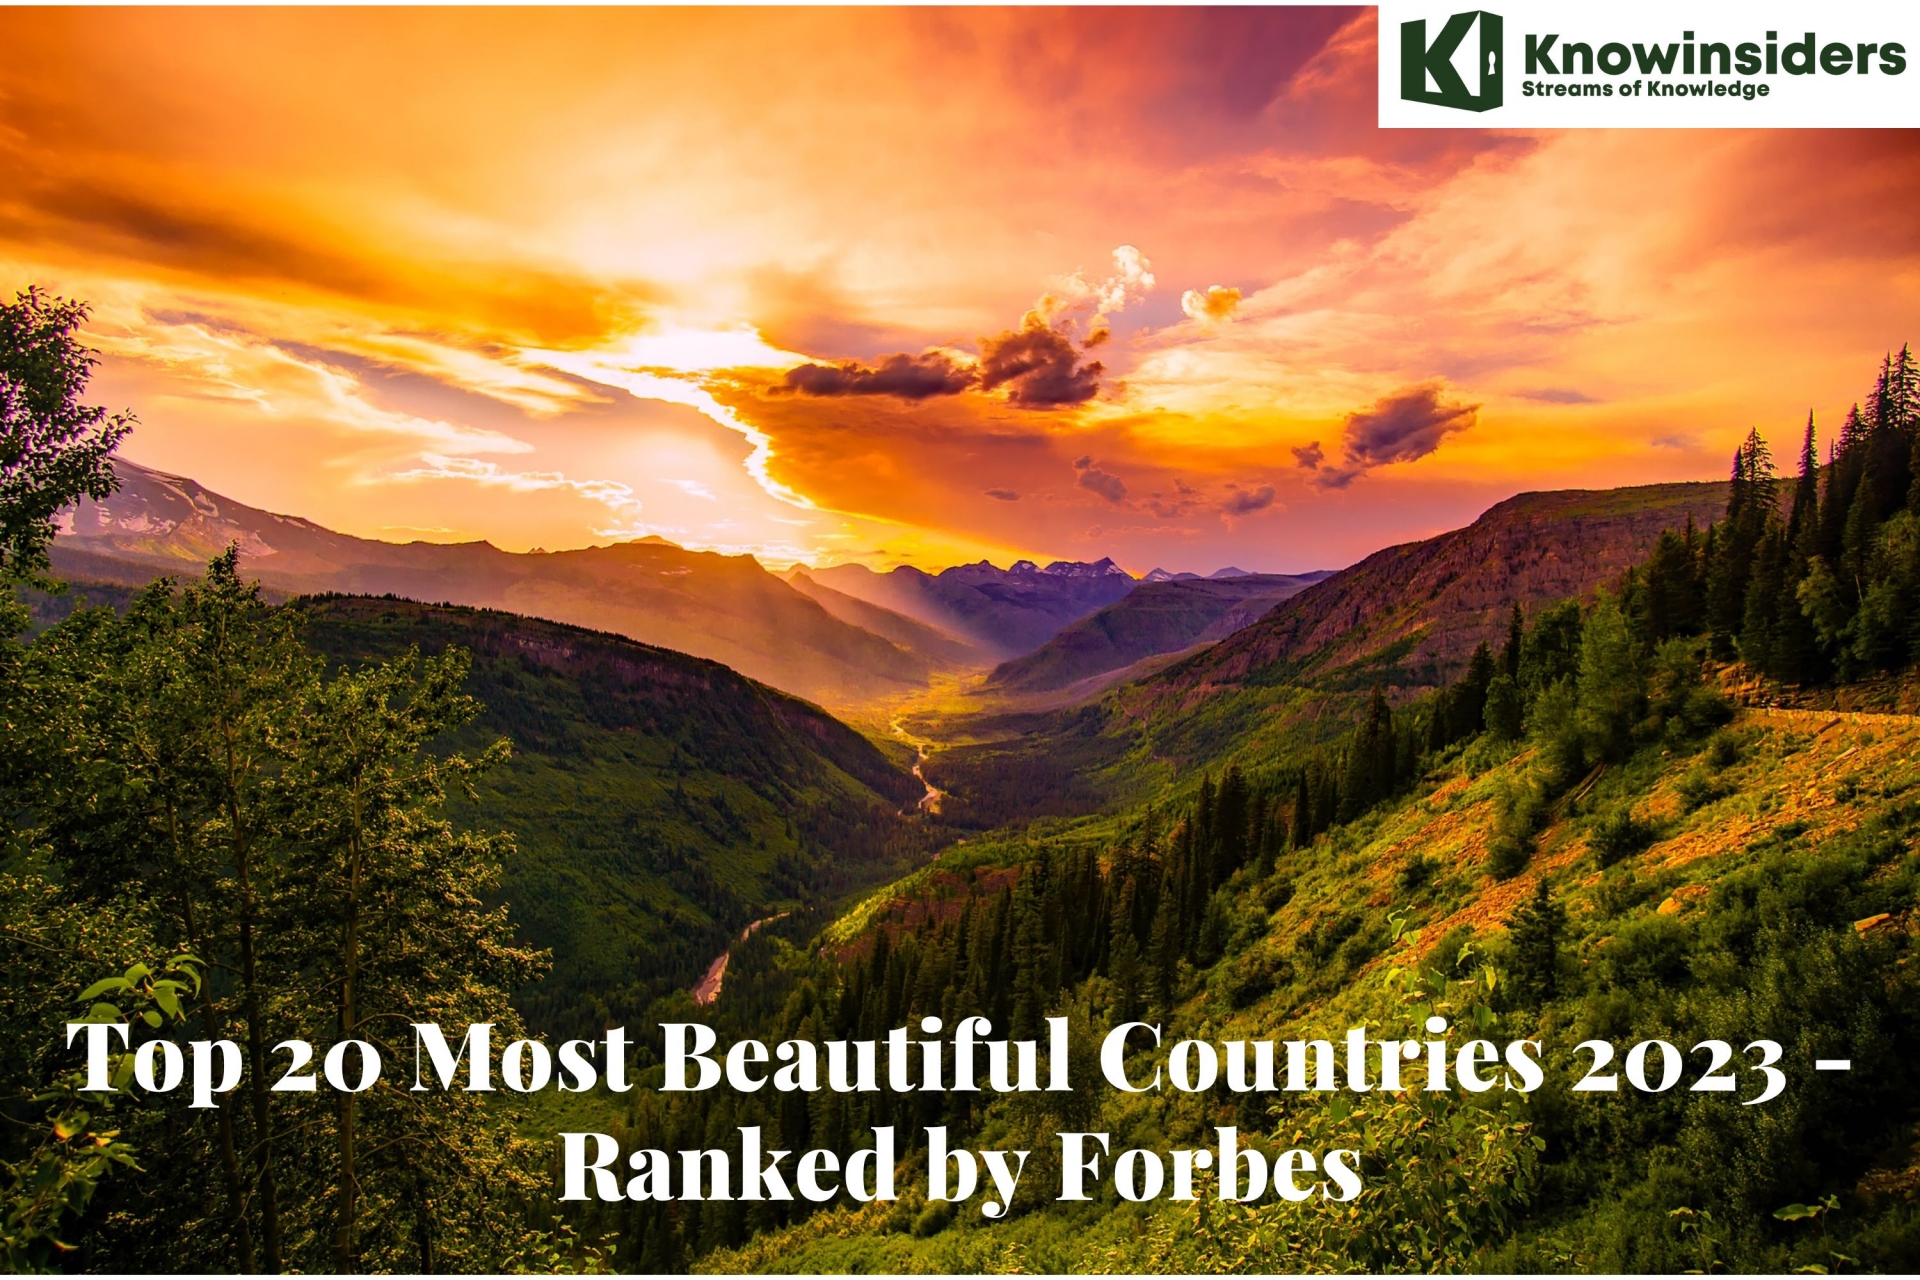 Top 20 Most Beautiful Countries 2023 - Ranked by Forbes